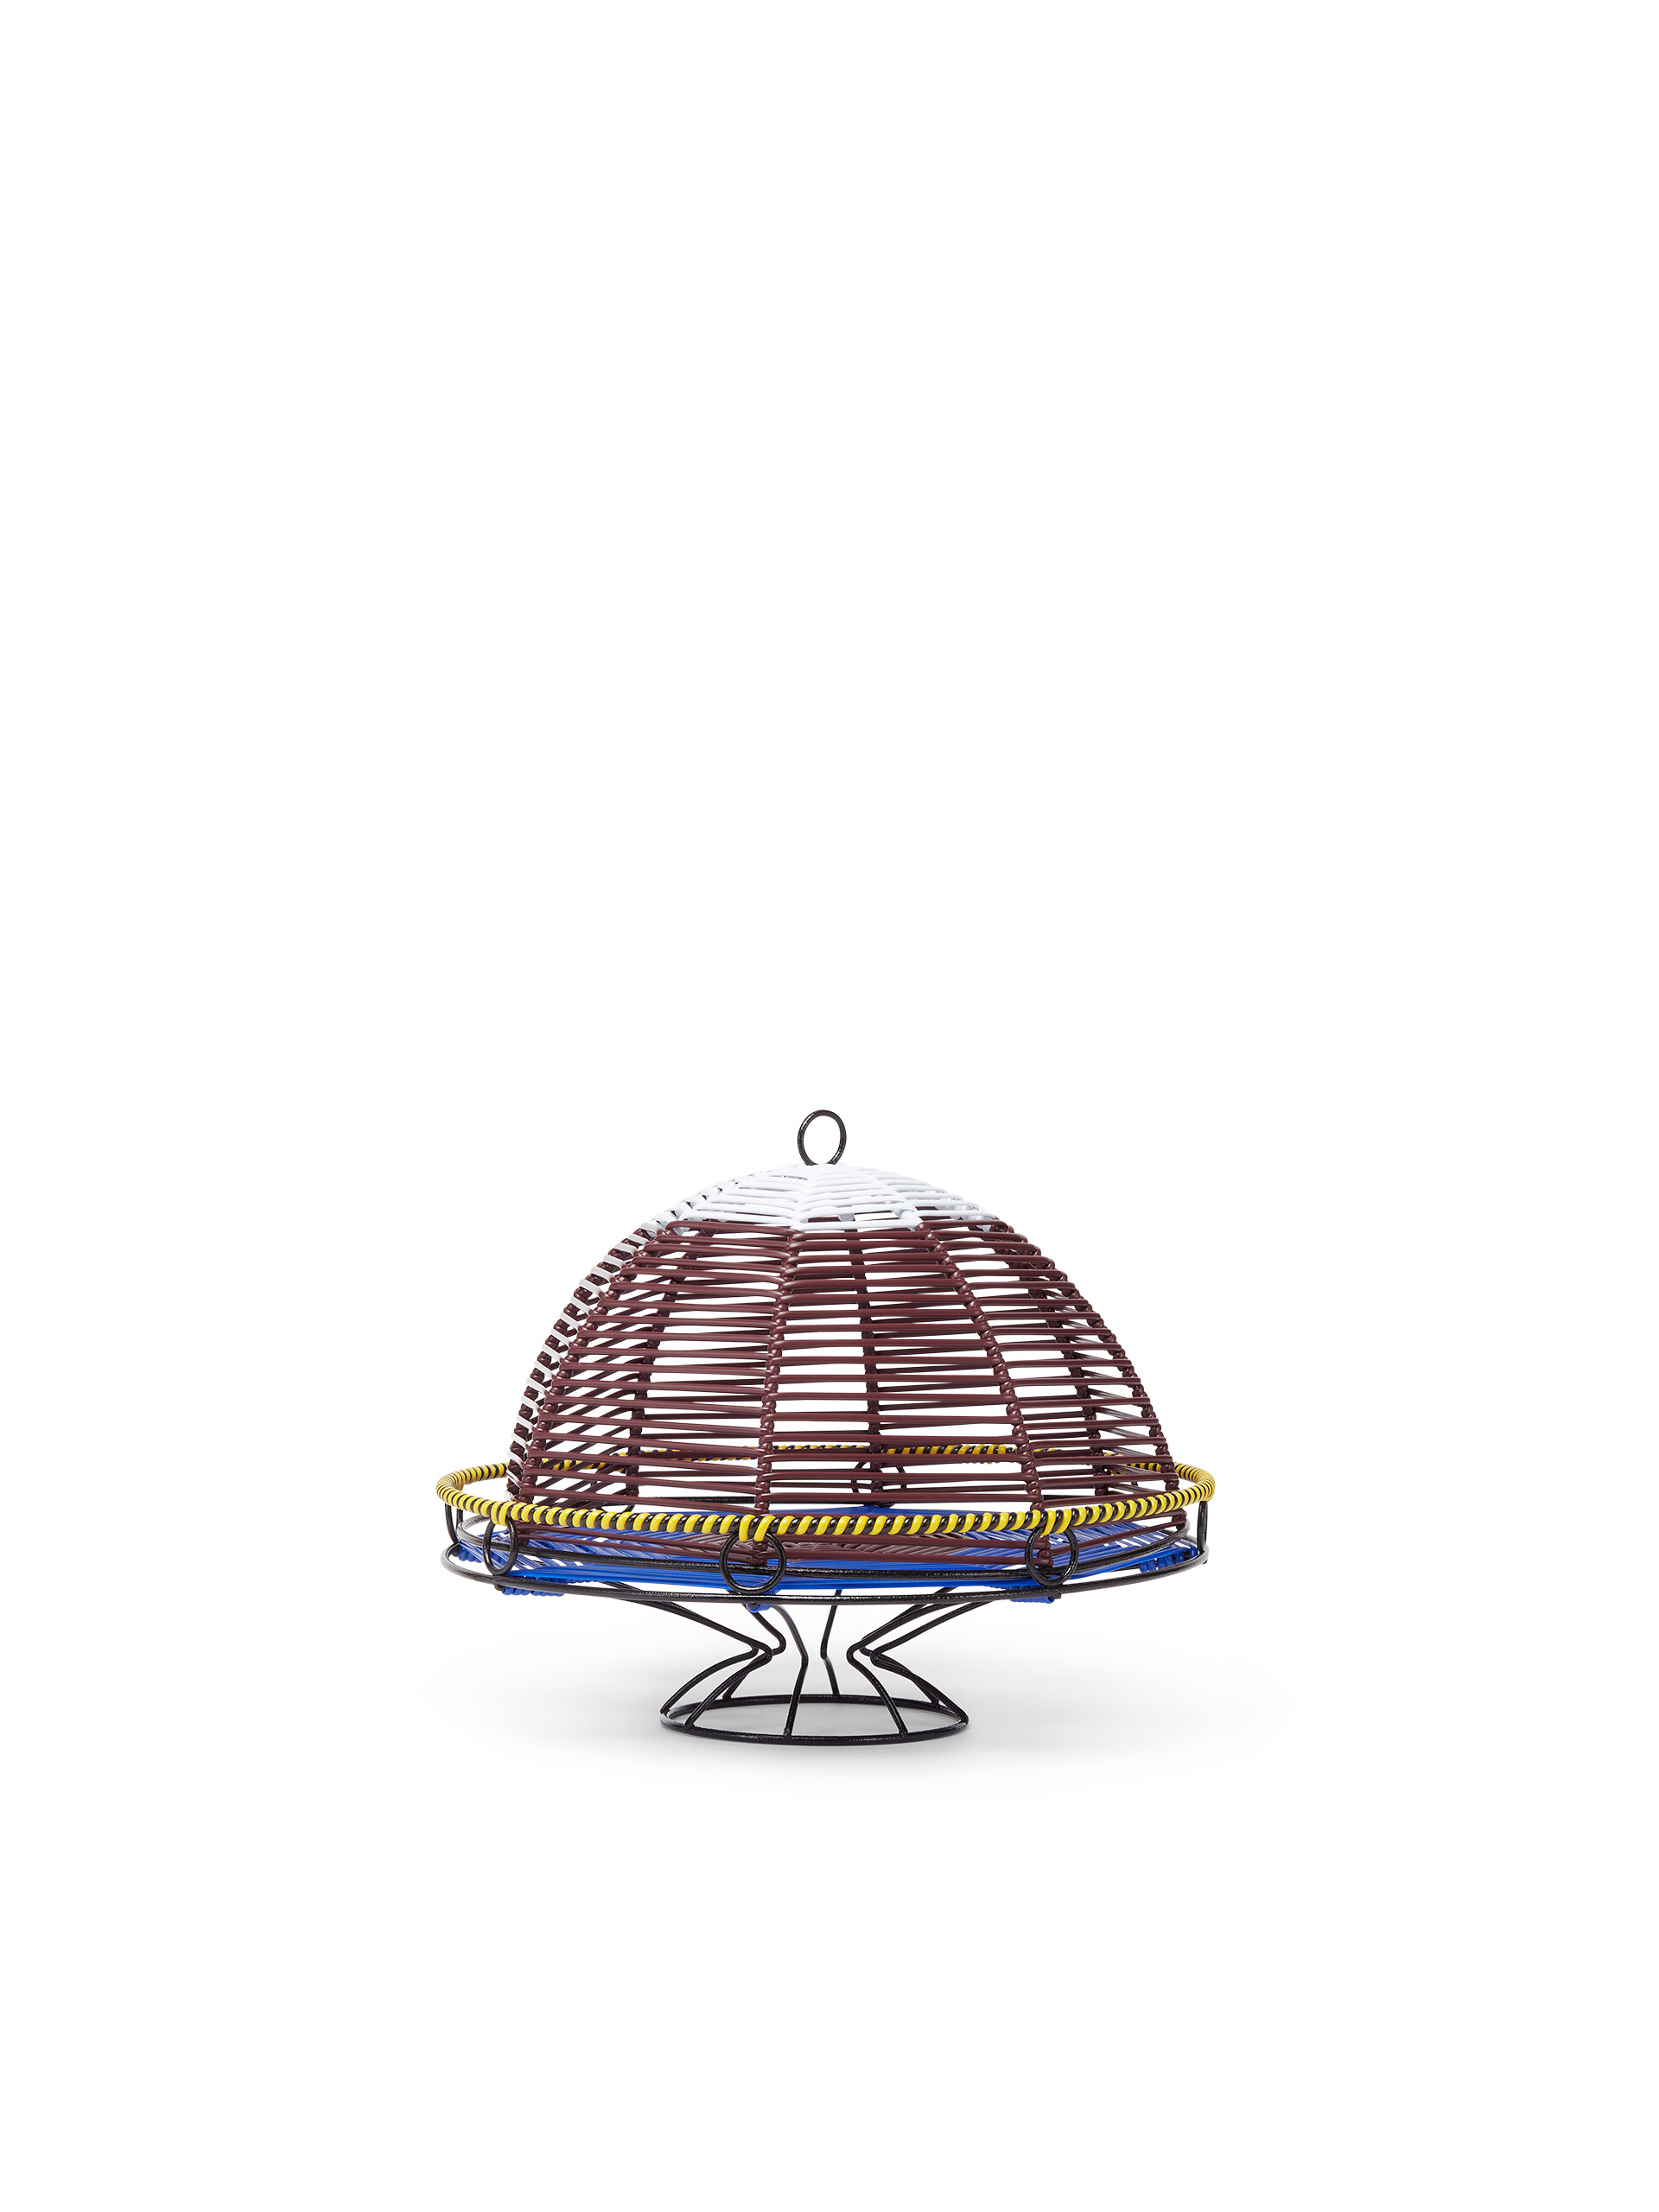 MARNI MARKET cake stand in metal and blue PVC - Home Accessories - Image 2